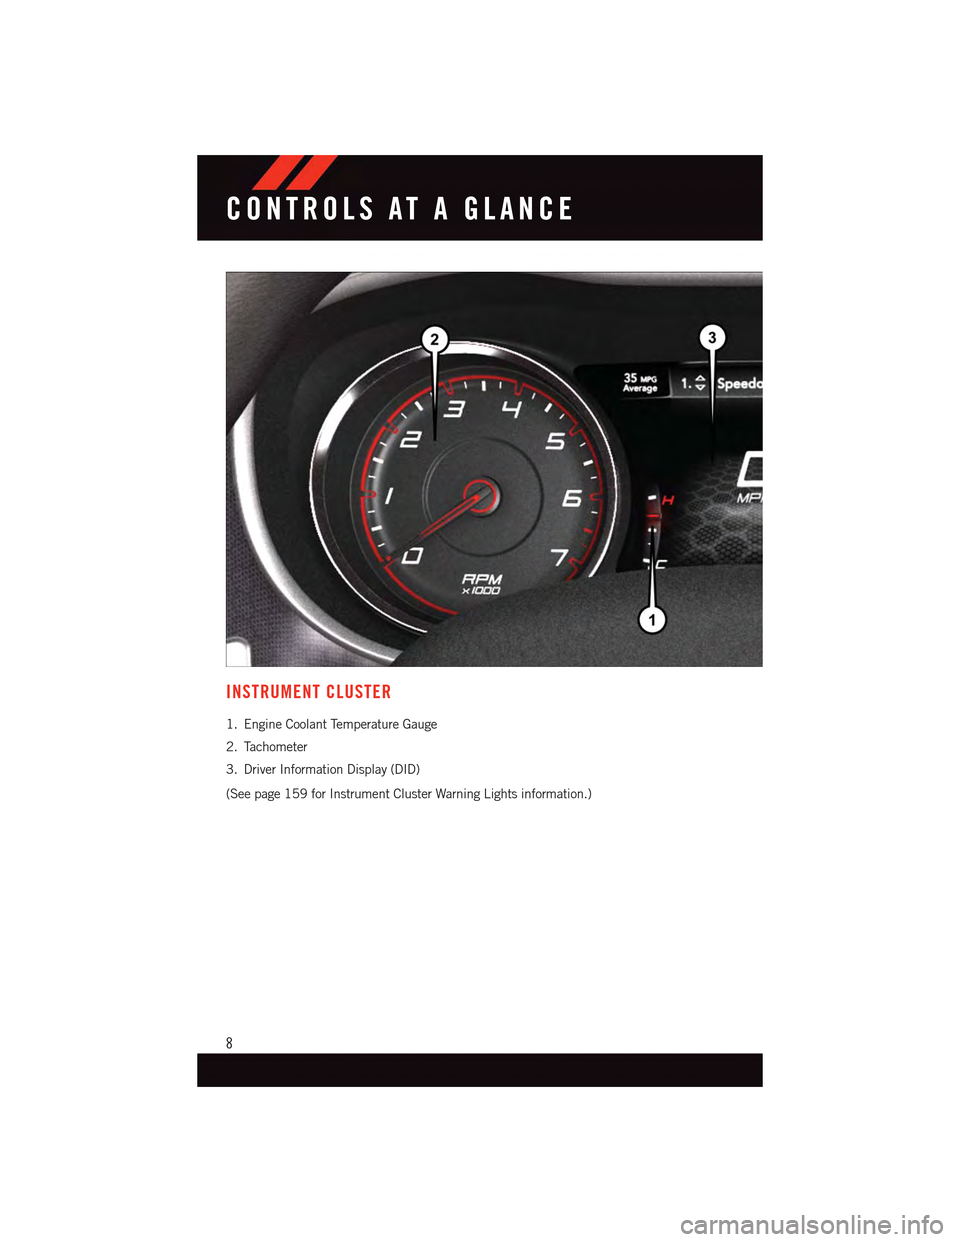 DODGE CHARGER 2015 7.G User Guide INSTRUMENT CLUSTER
1. Engine Coolant Temperature Gauge
2. Tachometer
3. Driver Information Display (DID)
(See page 159 for Instrument Cluster Warning Lights information.)
CONTROLS AT A GLANCE
8 